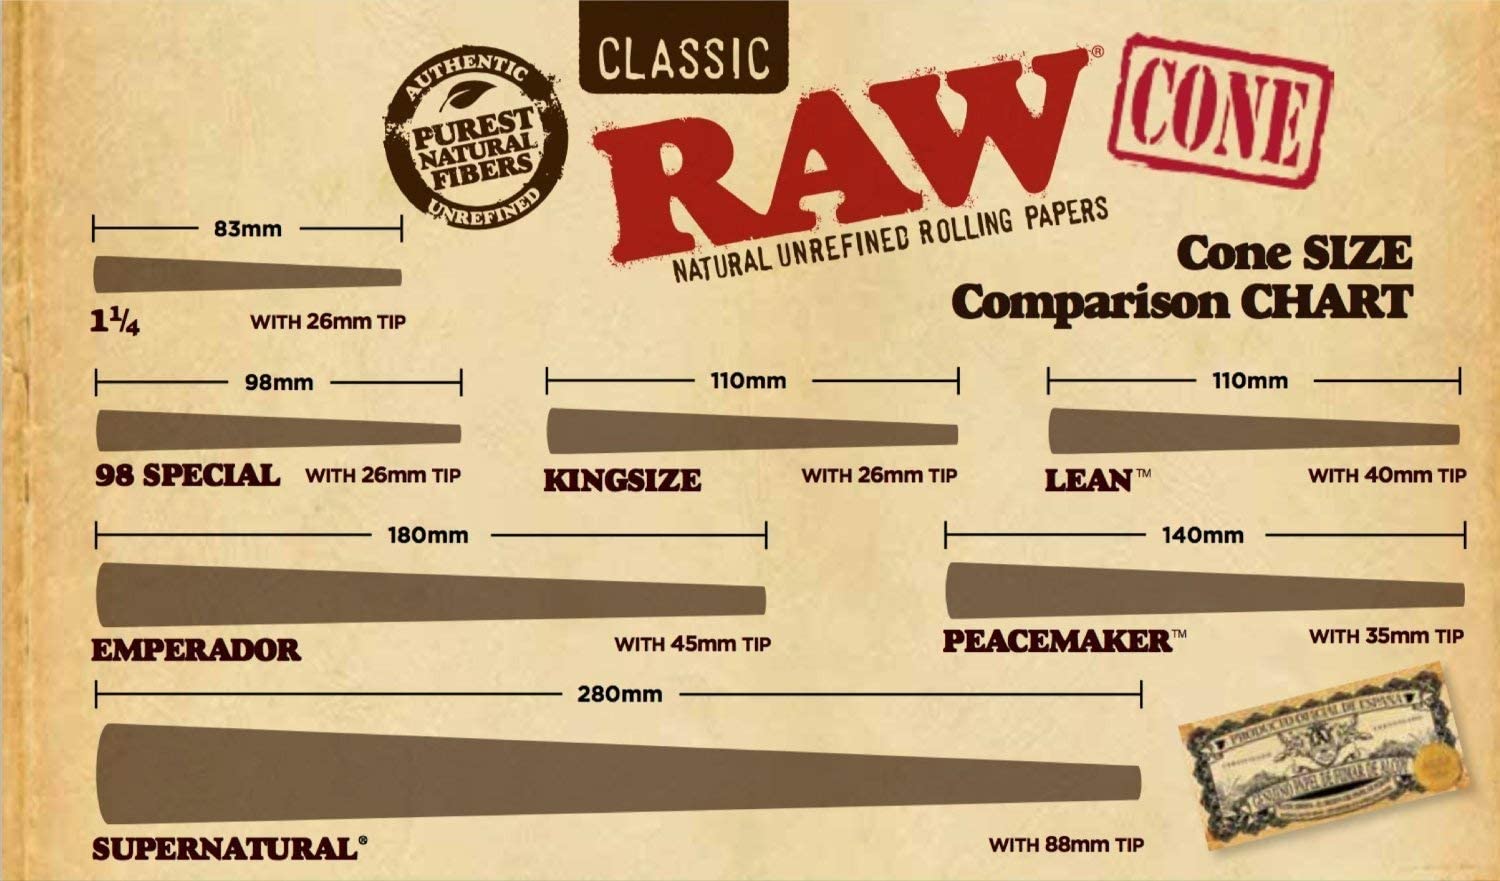 RAW 500 Classic King Size Cones 109mm Pre Rolled Hemp Cones W Gallery Box 